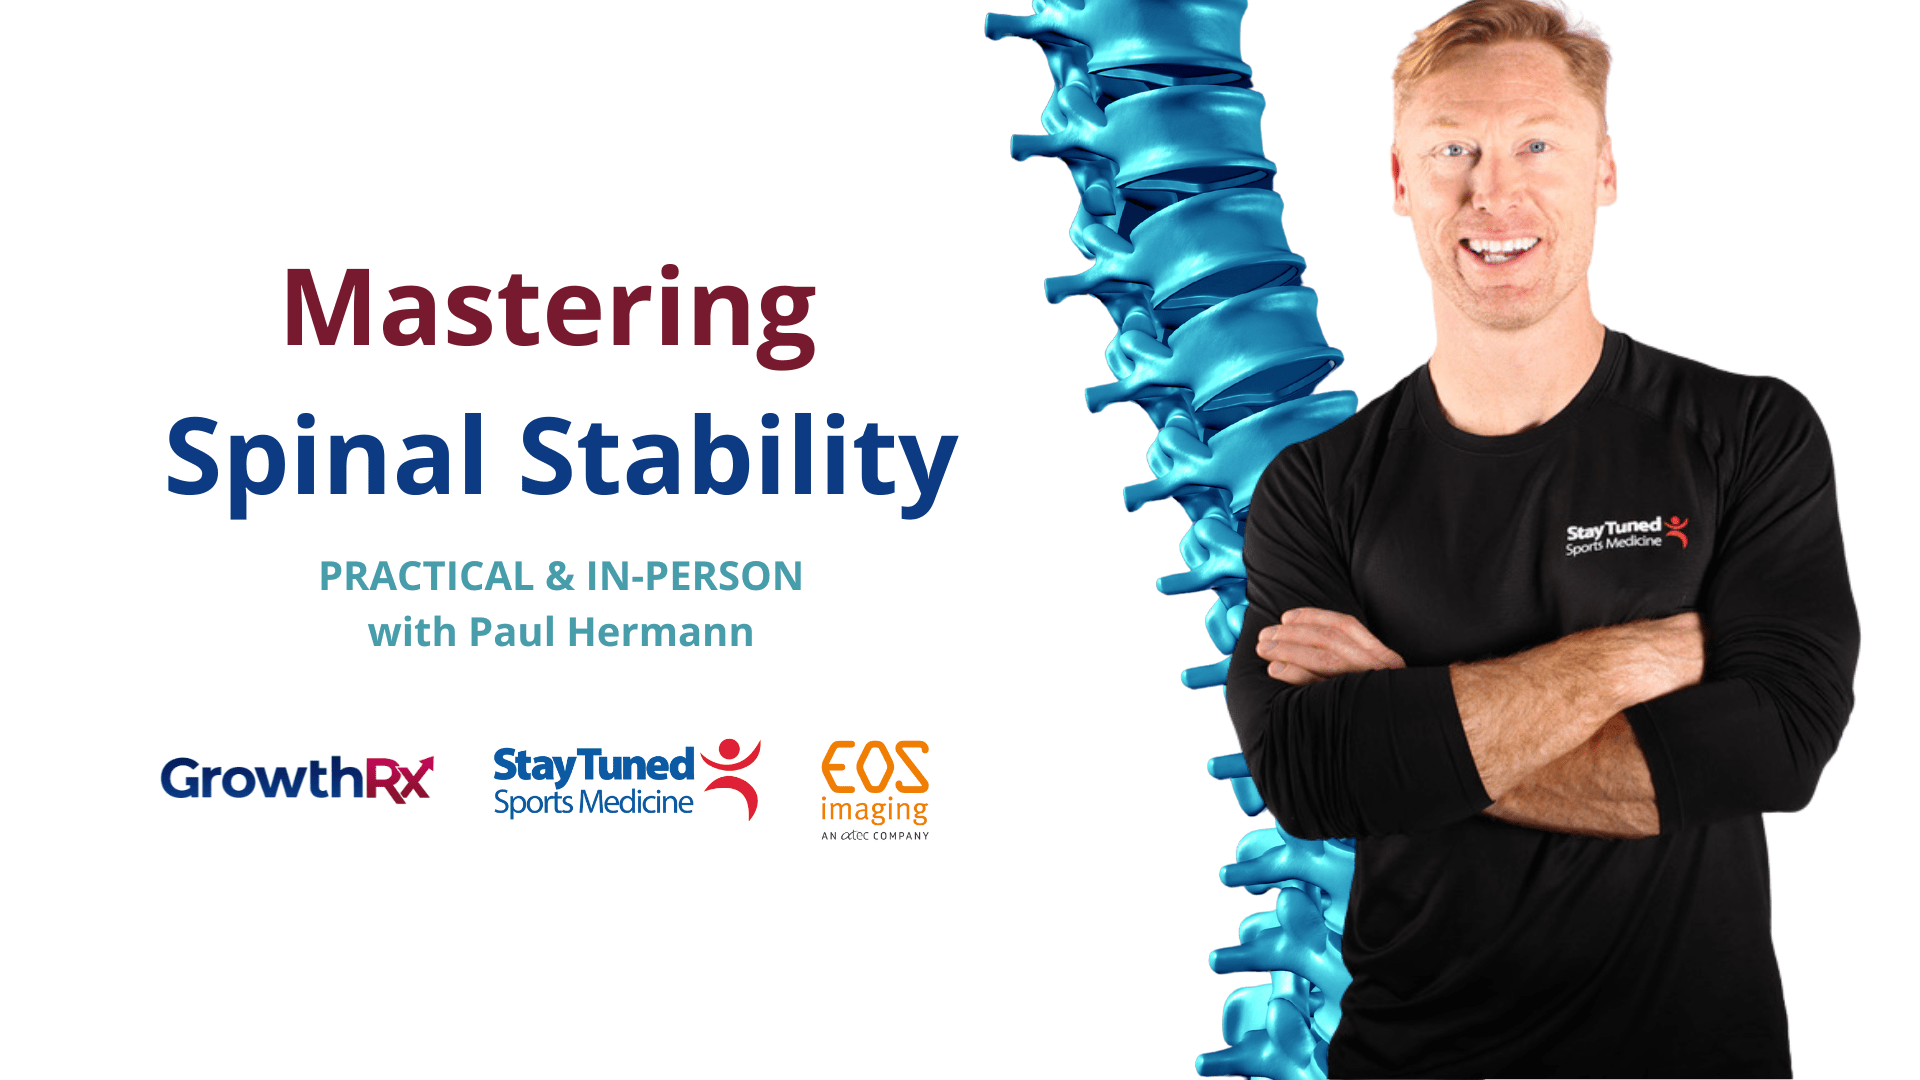 Mastering Spinal Stability - Paul Hermann